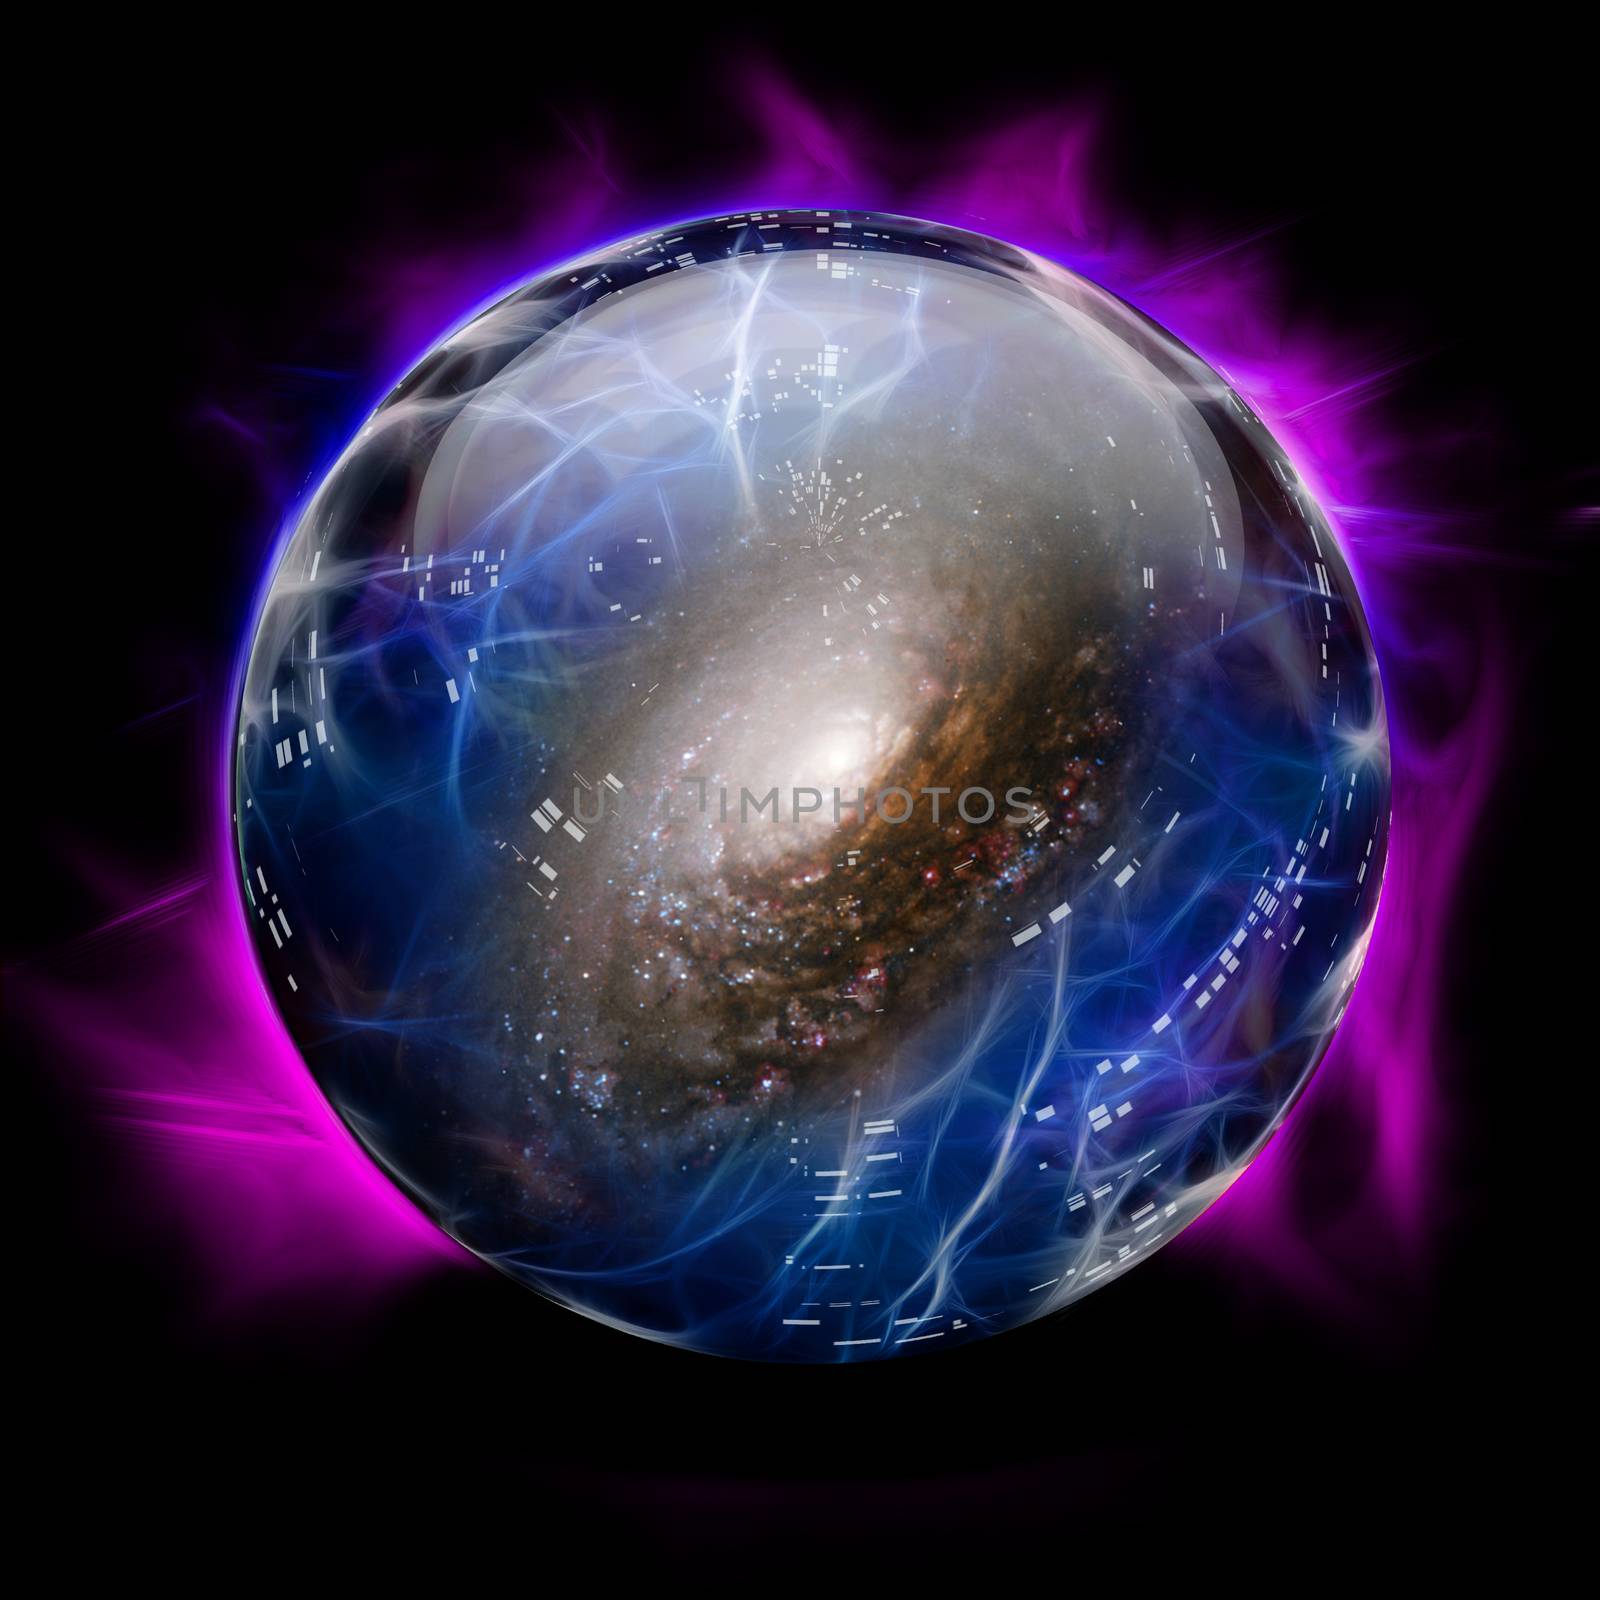 Crystal Ball Shows Galaxy. 3D rendering